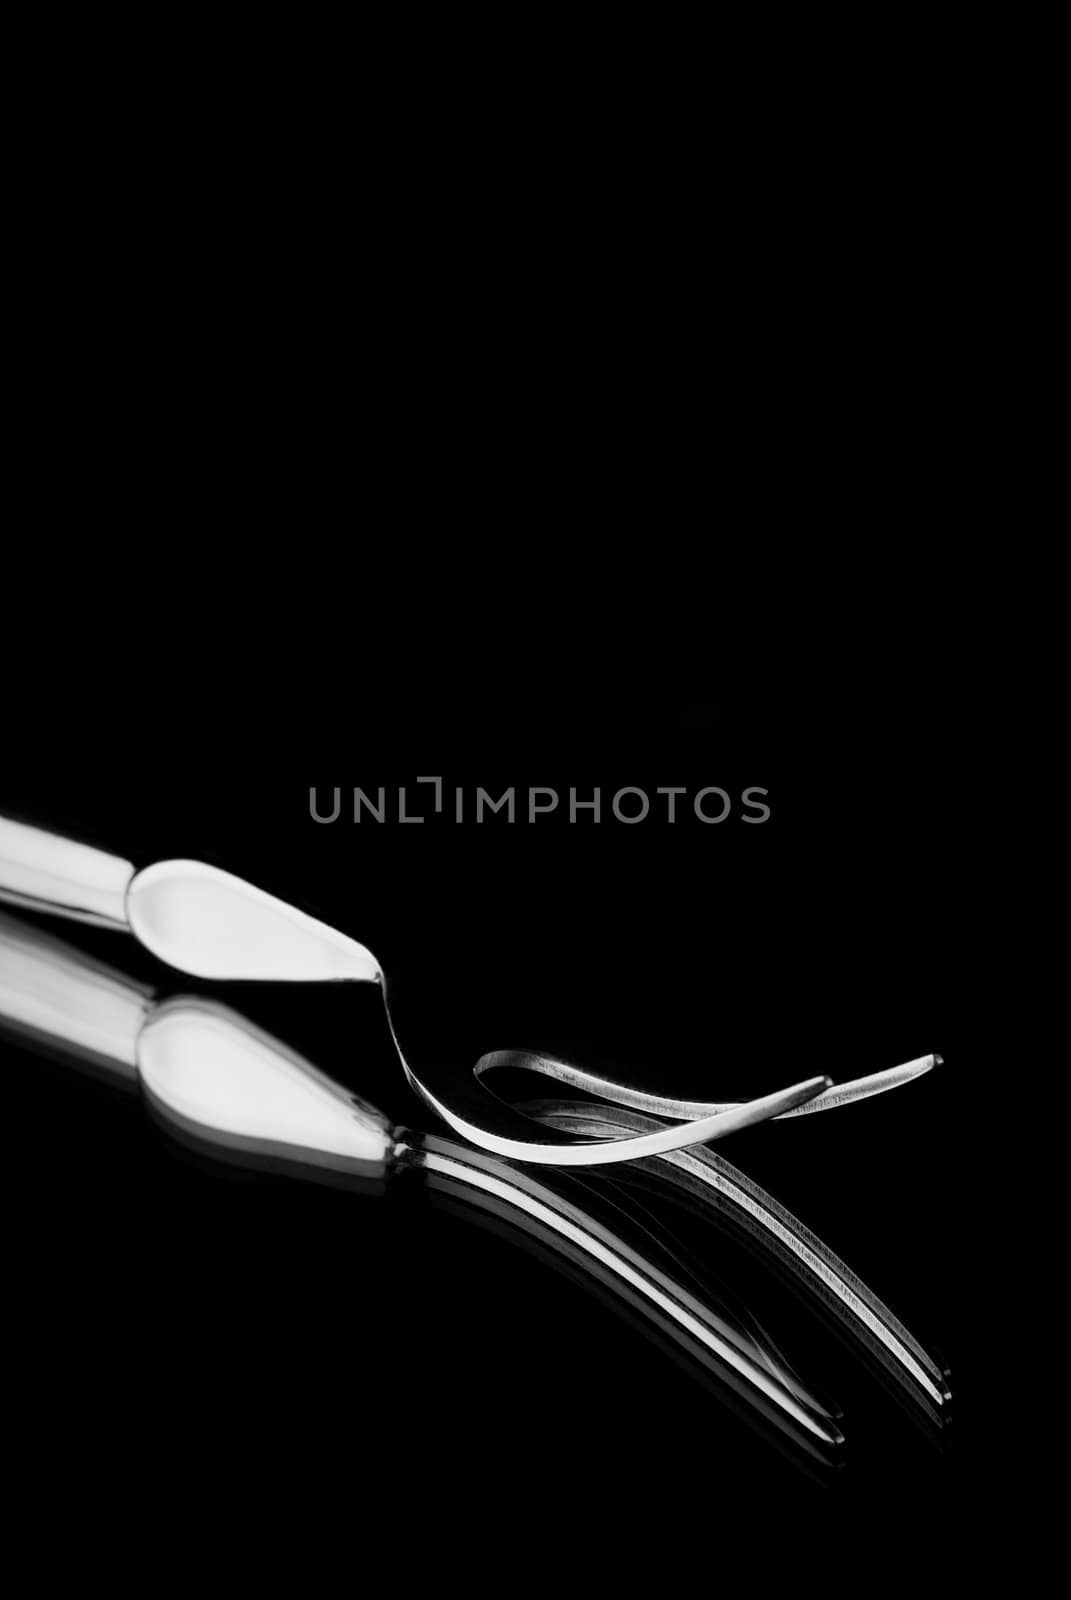 Single carving fork reflection on mirror with black background